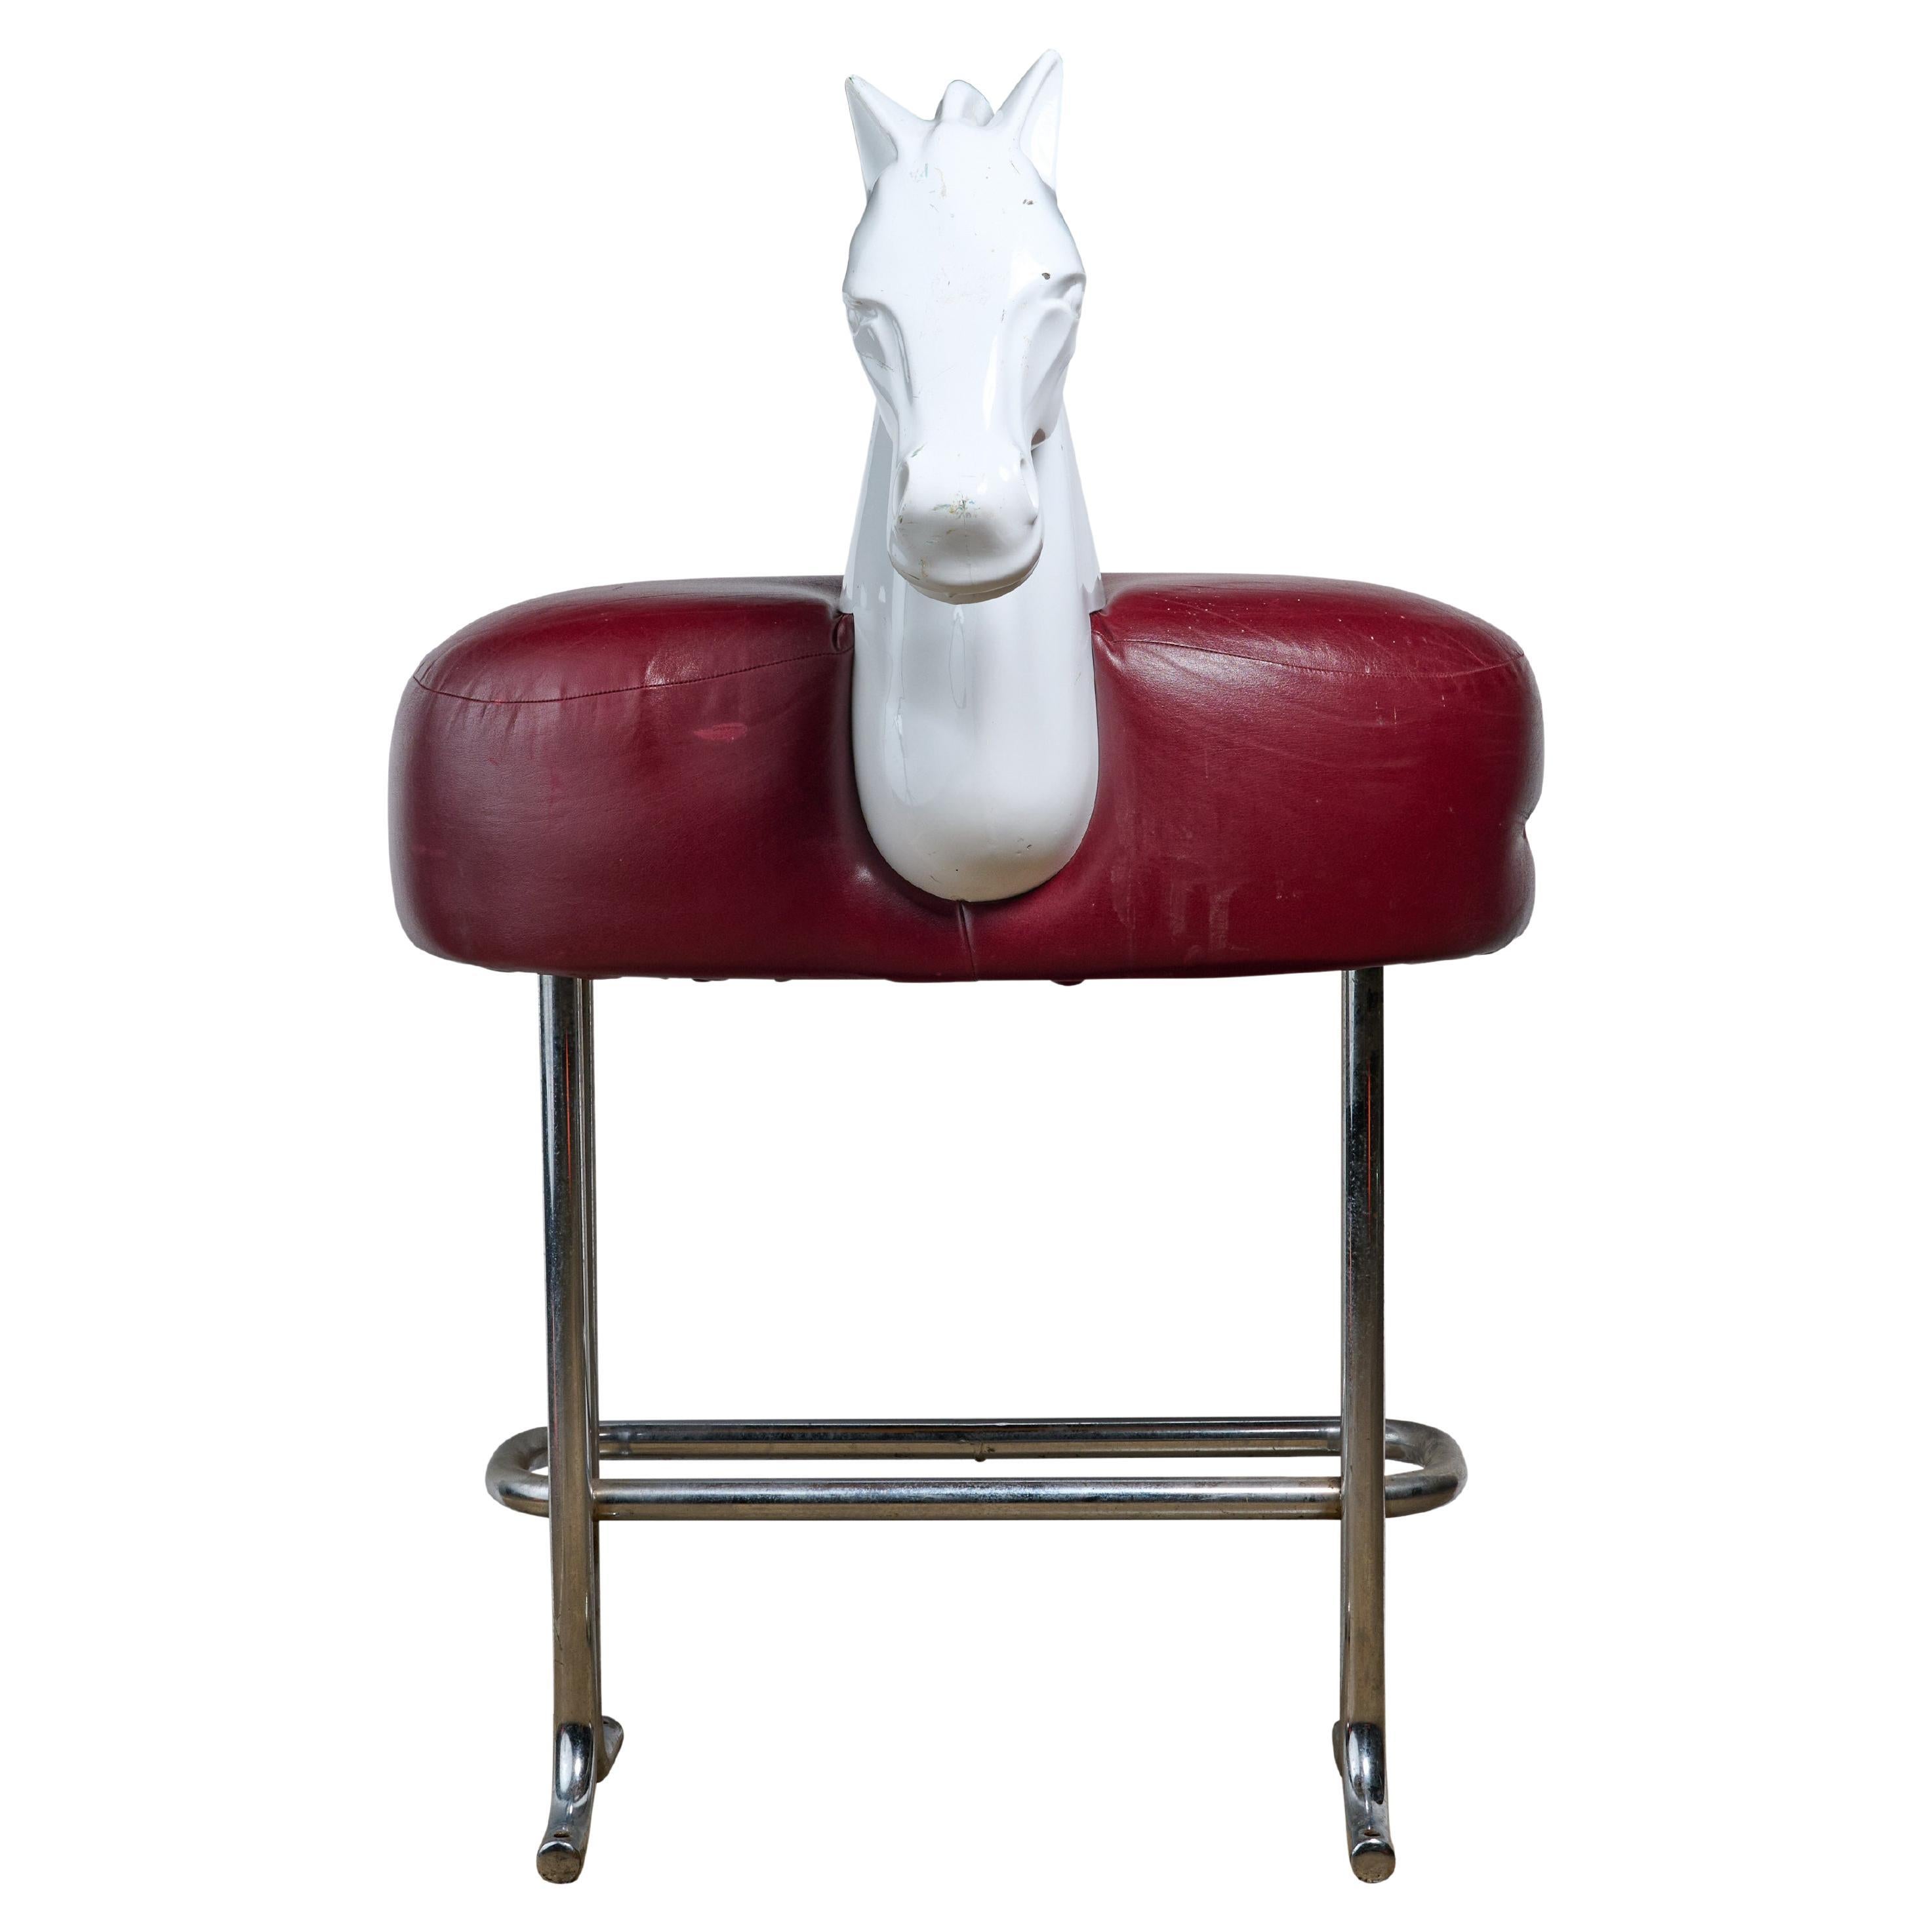 Italian Mid-Century Child's Barber Chair with Horse Head